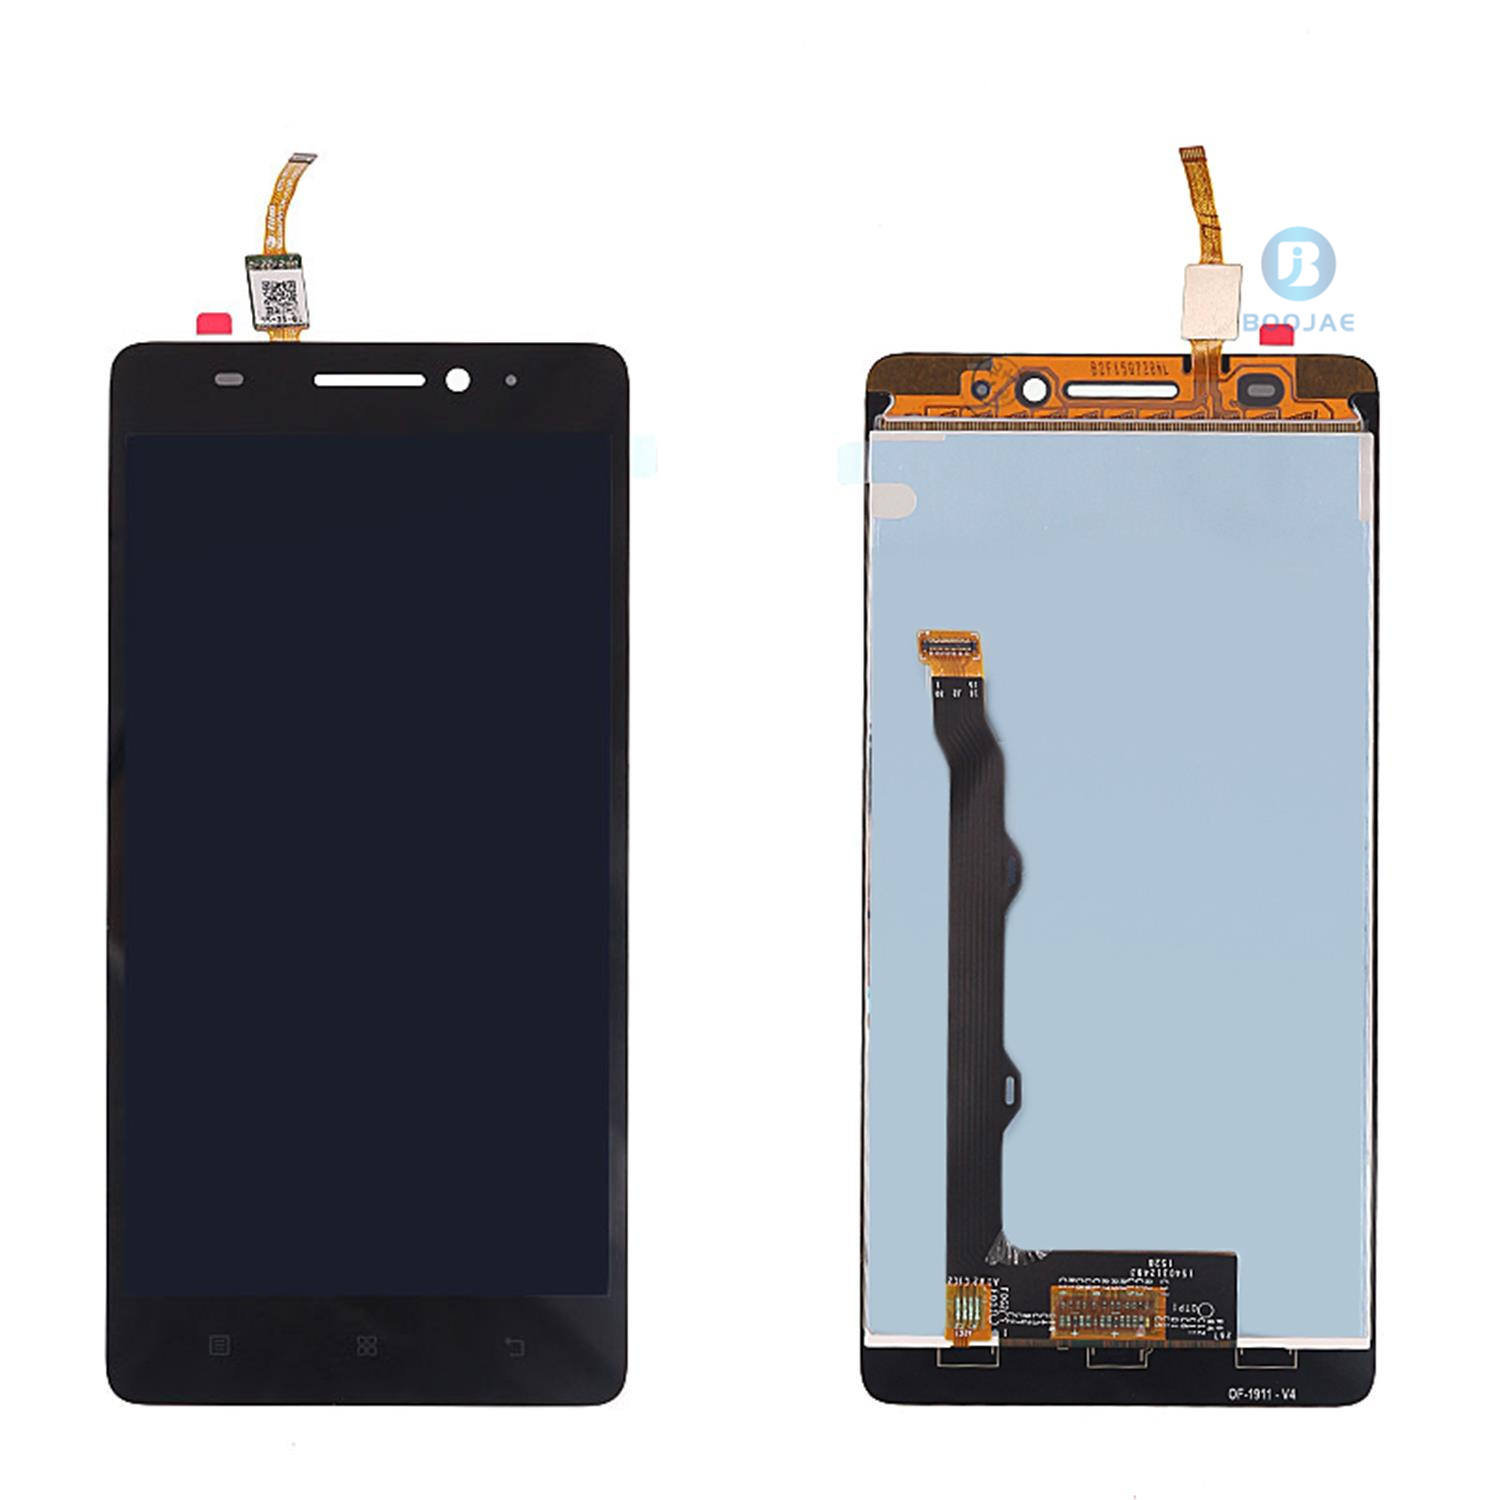 For Lenovo A7000 LCD Screen Display and Touch Panel Digitizer Assembly Replacement